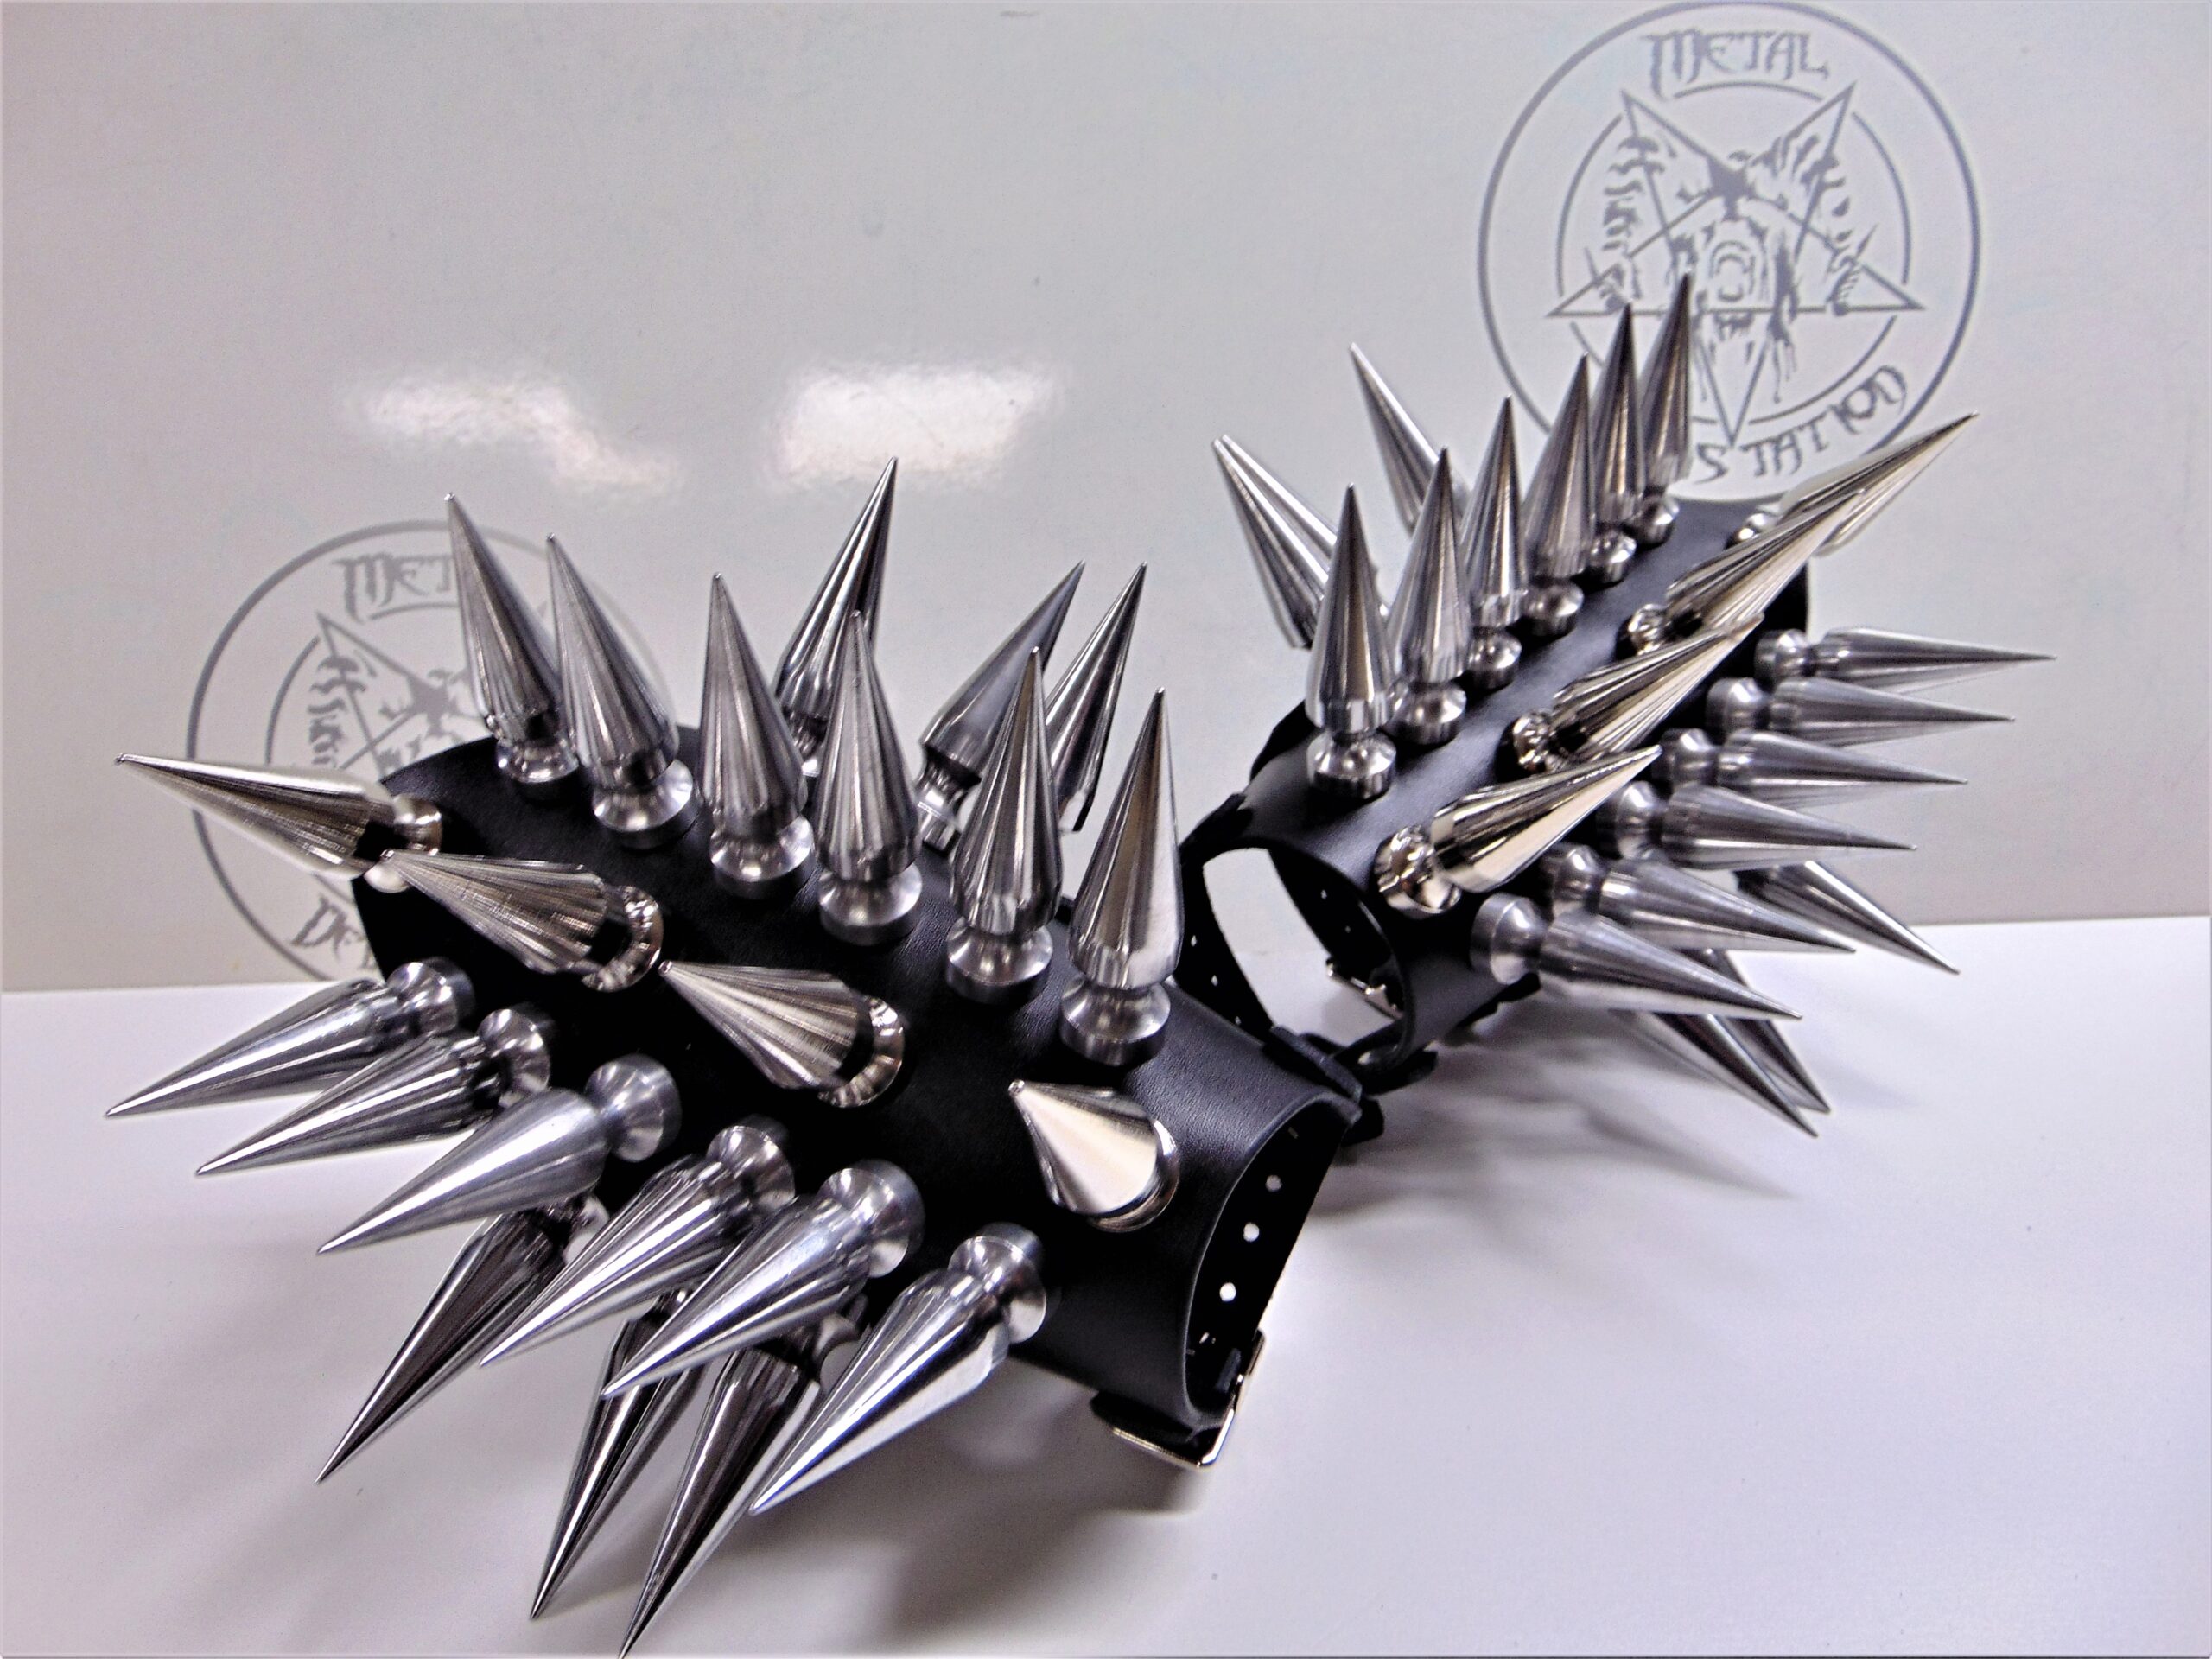 New Real Quality Nickle Medium Spike Metal Studs And Spikes For